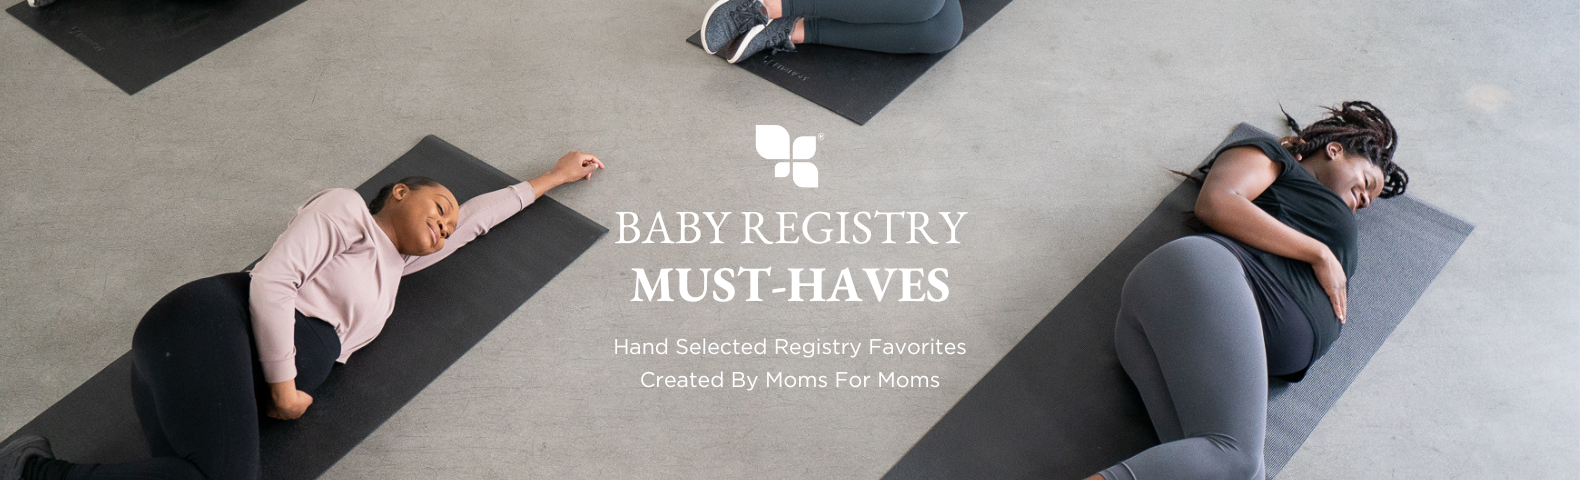 Baby Registry Campaign - Landing Page Headers (6).png